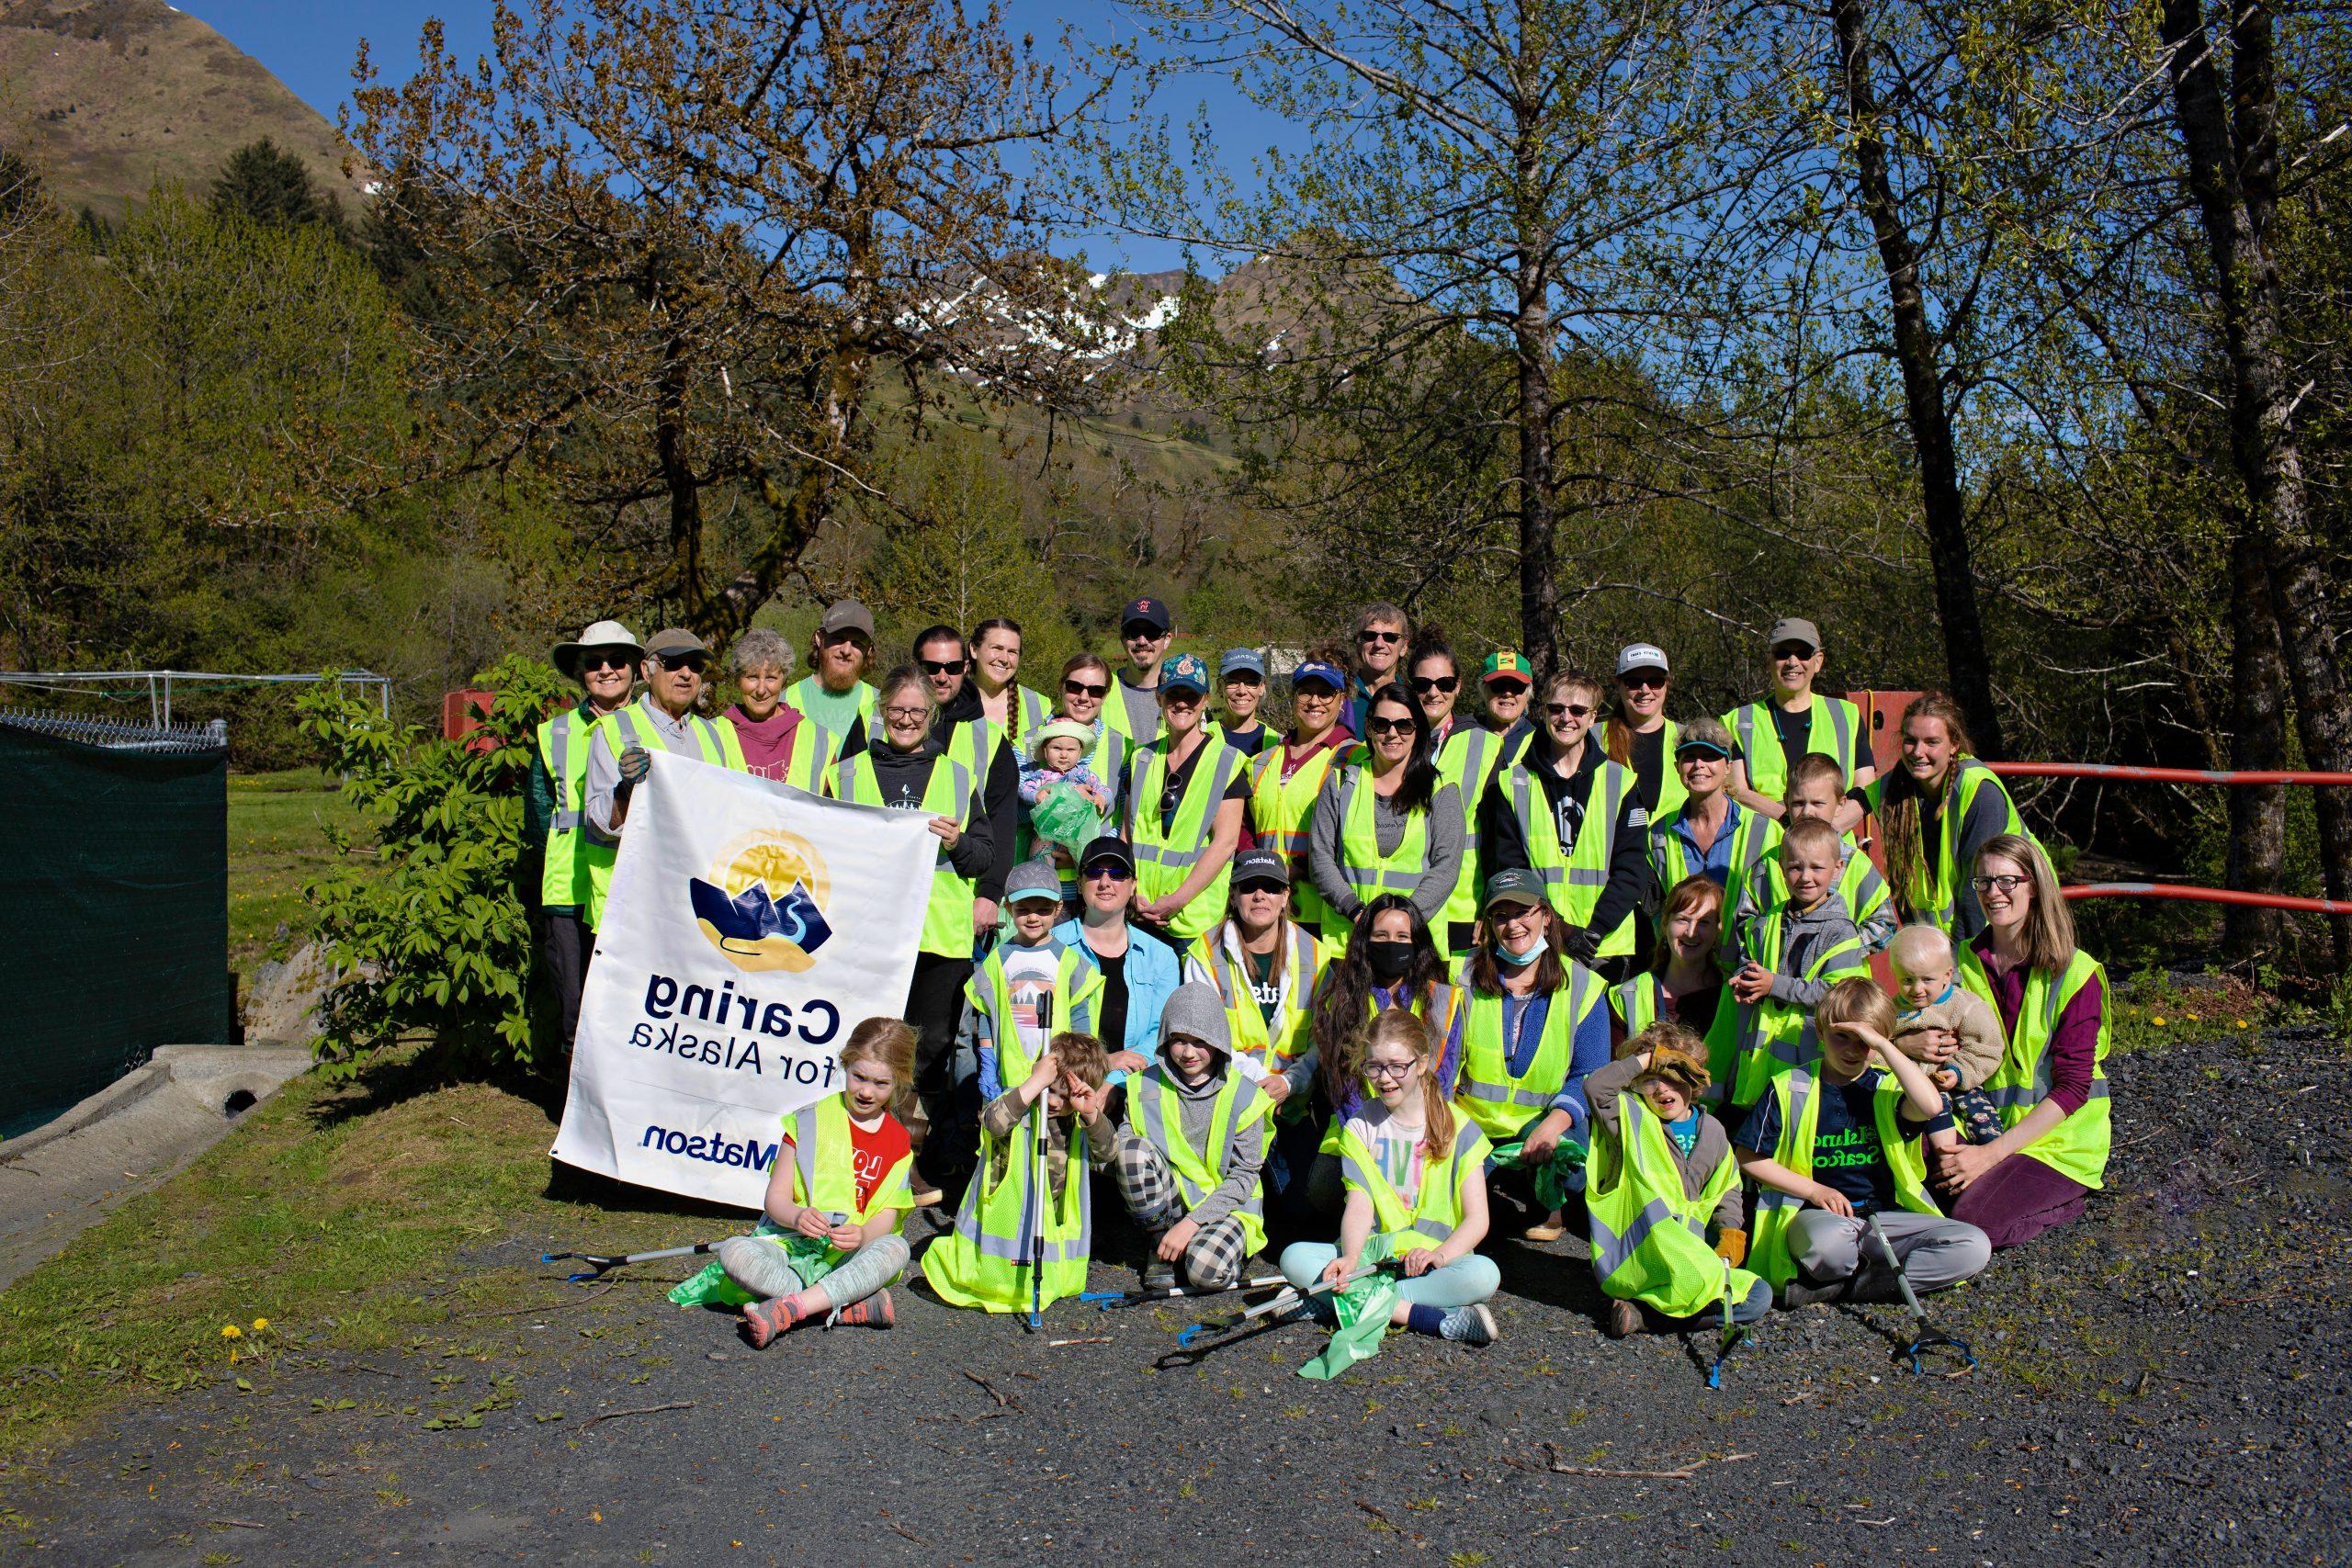 Volunteers wearing their yellow safety vests pose for a group picture with a Caring For Alaska banner.